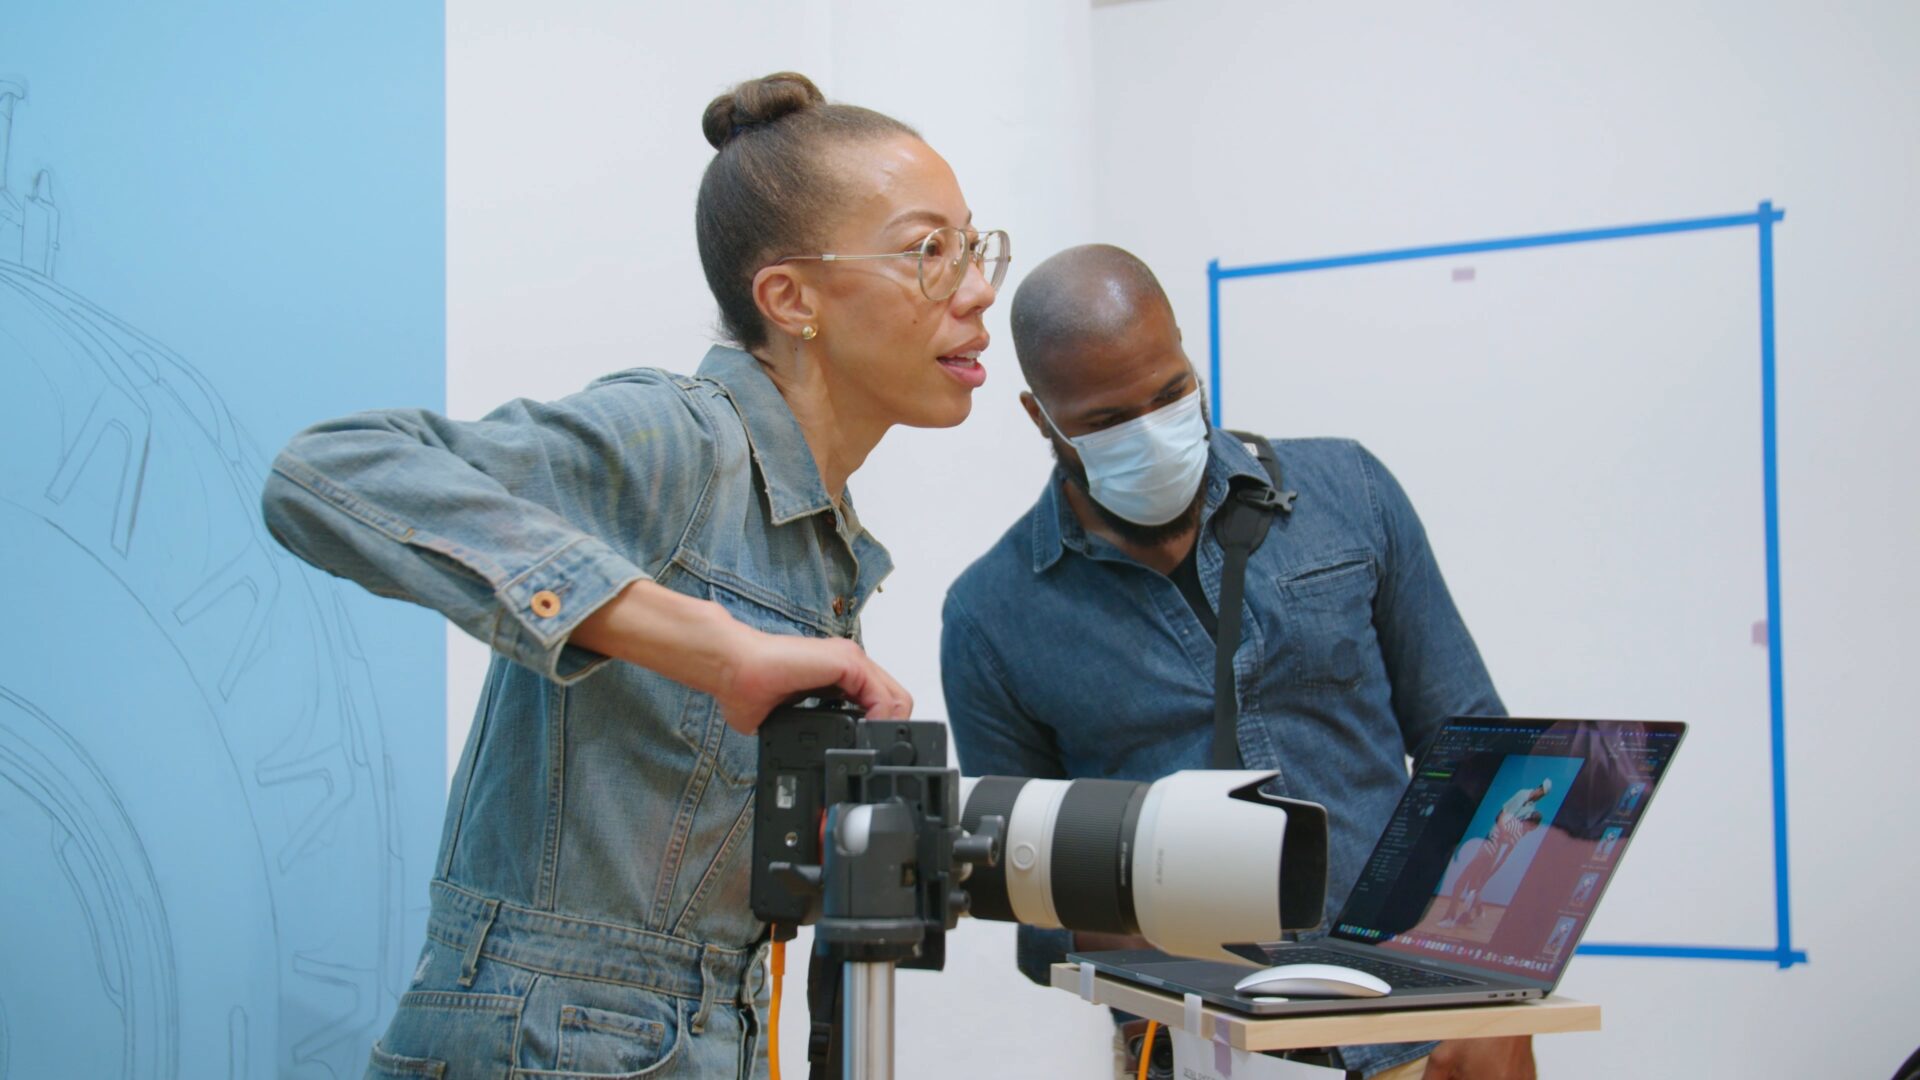 Amy Sherald photographing models in her Jersey City studio. Production still from the Art21 television series “Art in the Twenty-First Century,” Season 11, 2023.